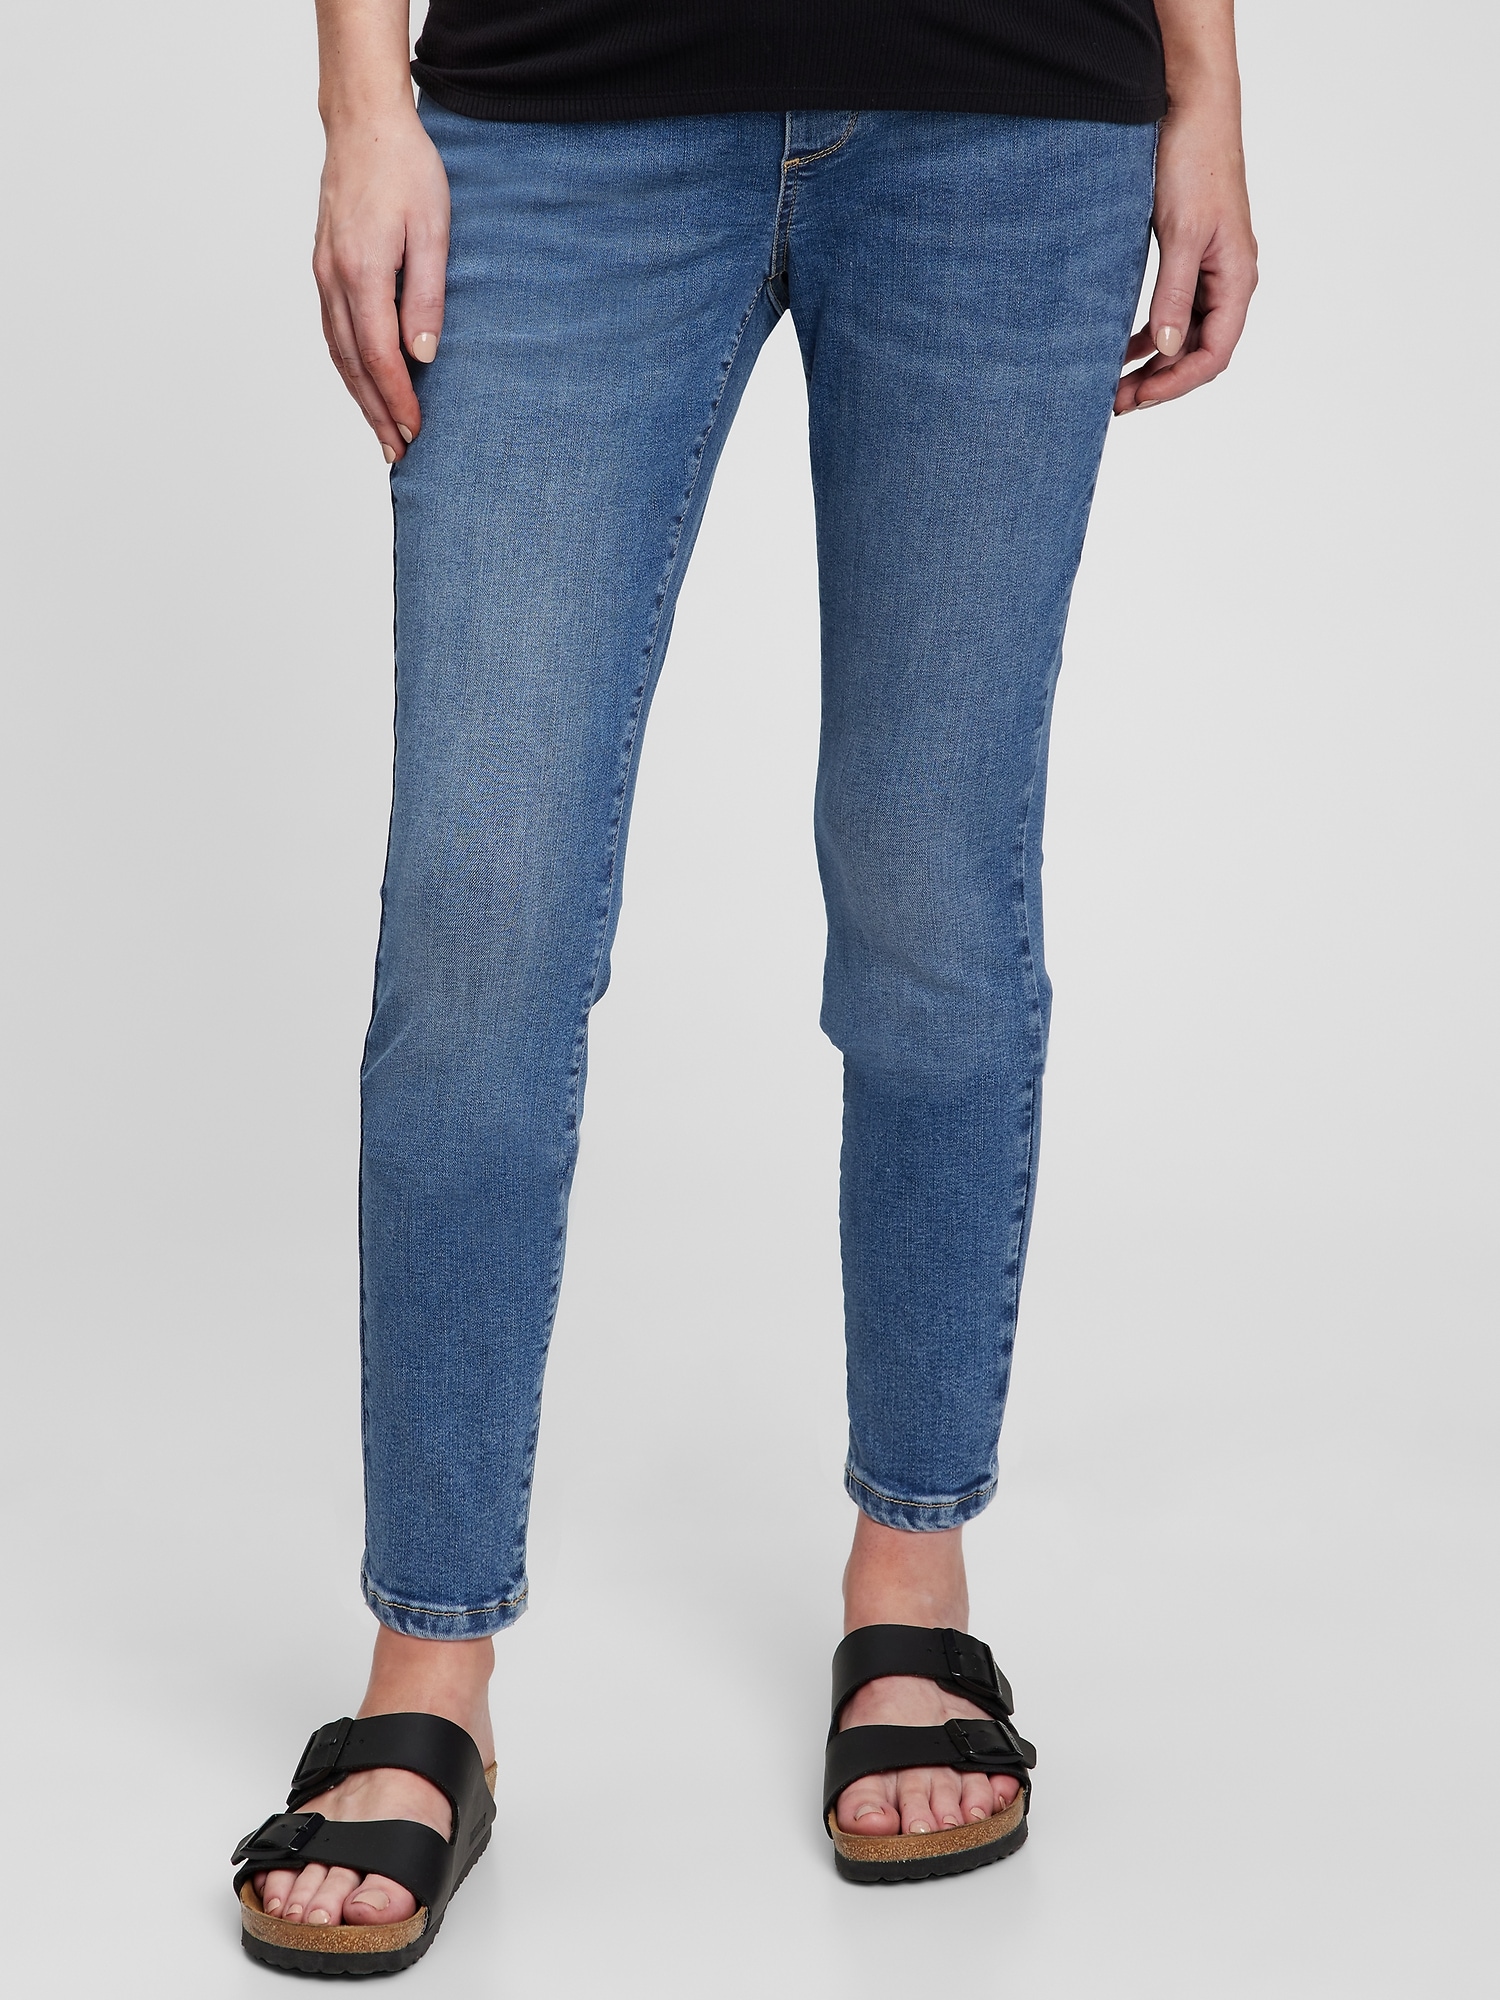 Gap - Maternity Solid Blue Jeans 28 Waist (Maternity) - 65% off